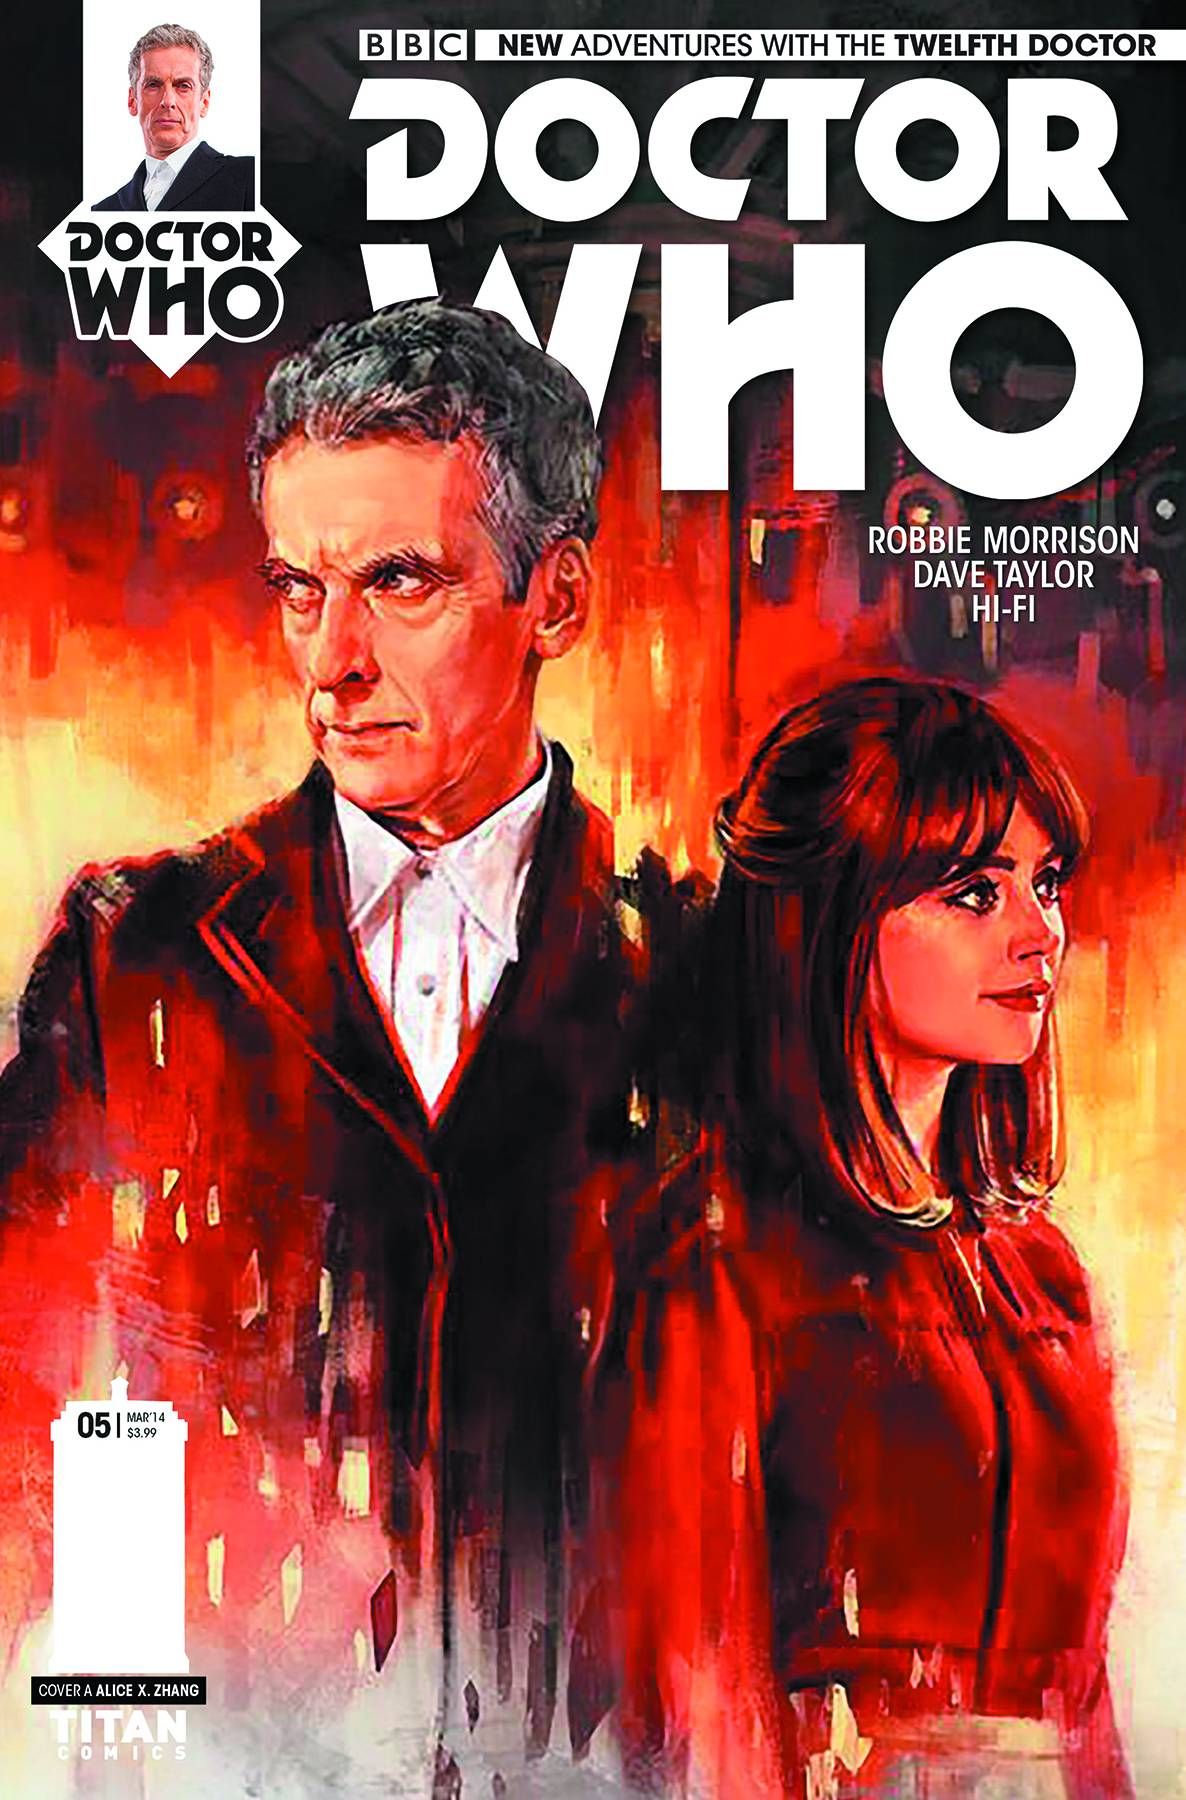 Doctor Who: The Twelfth Doctor #5 Comic